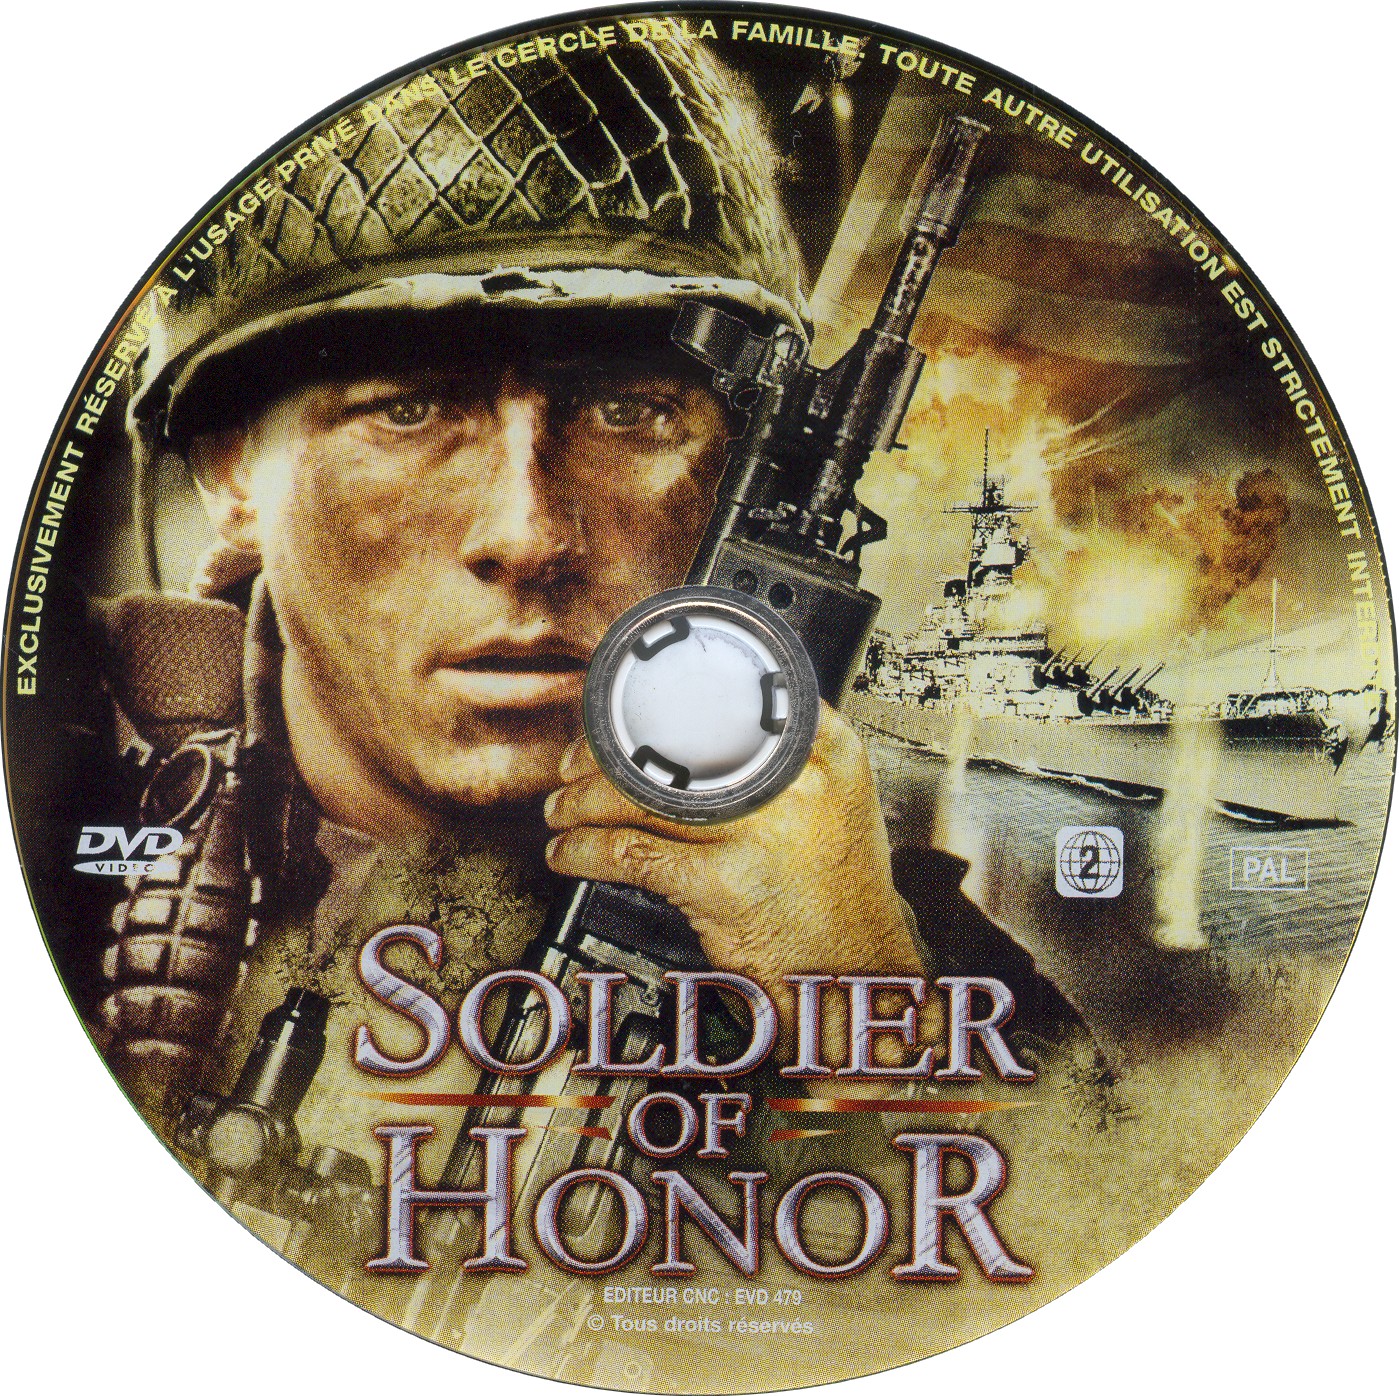 Soldier of honor